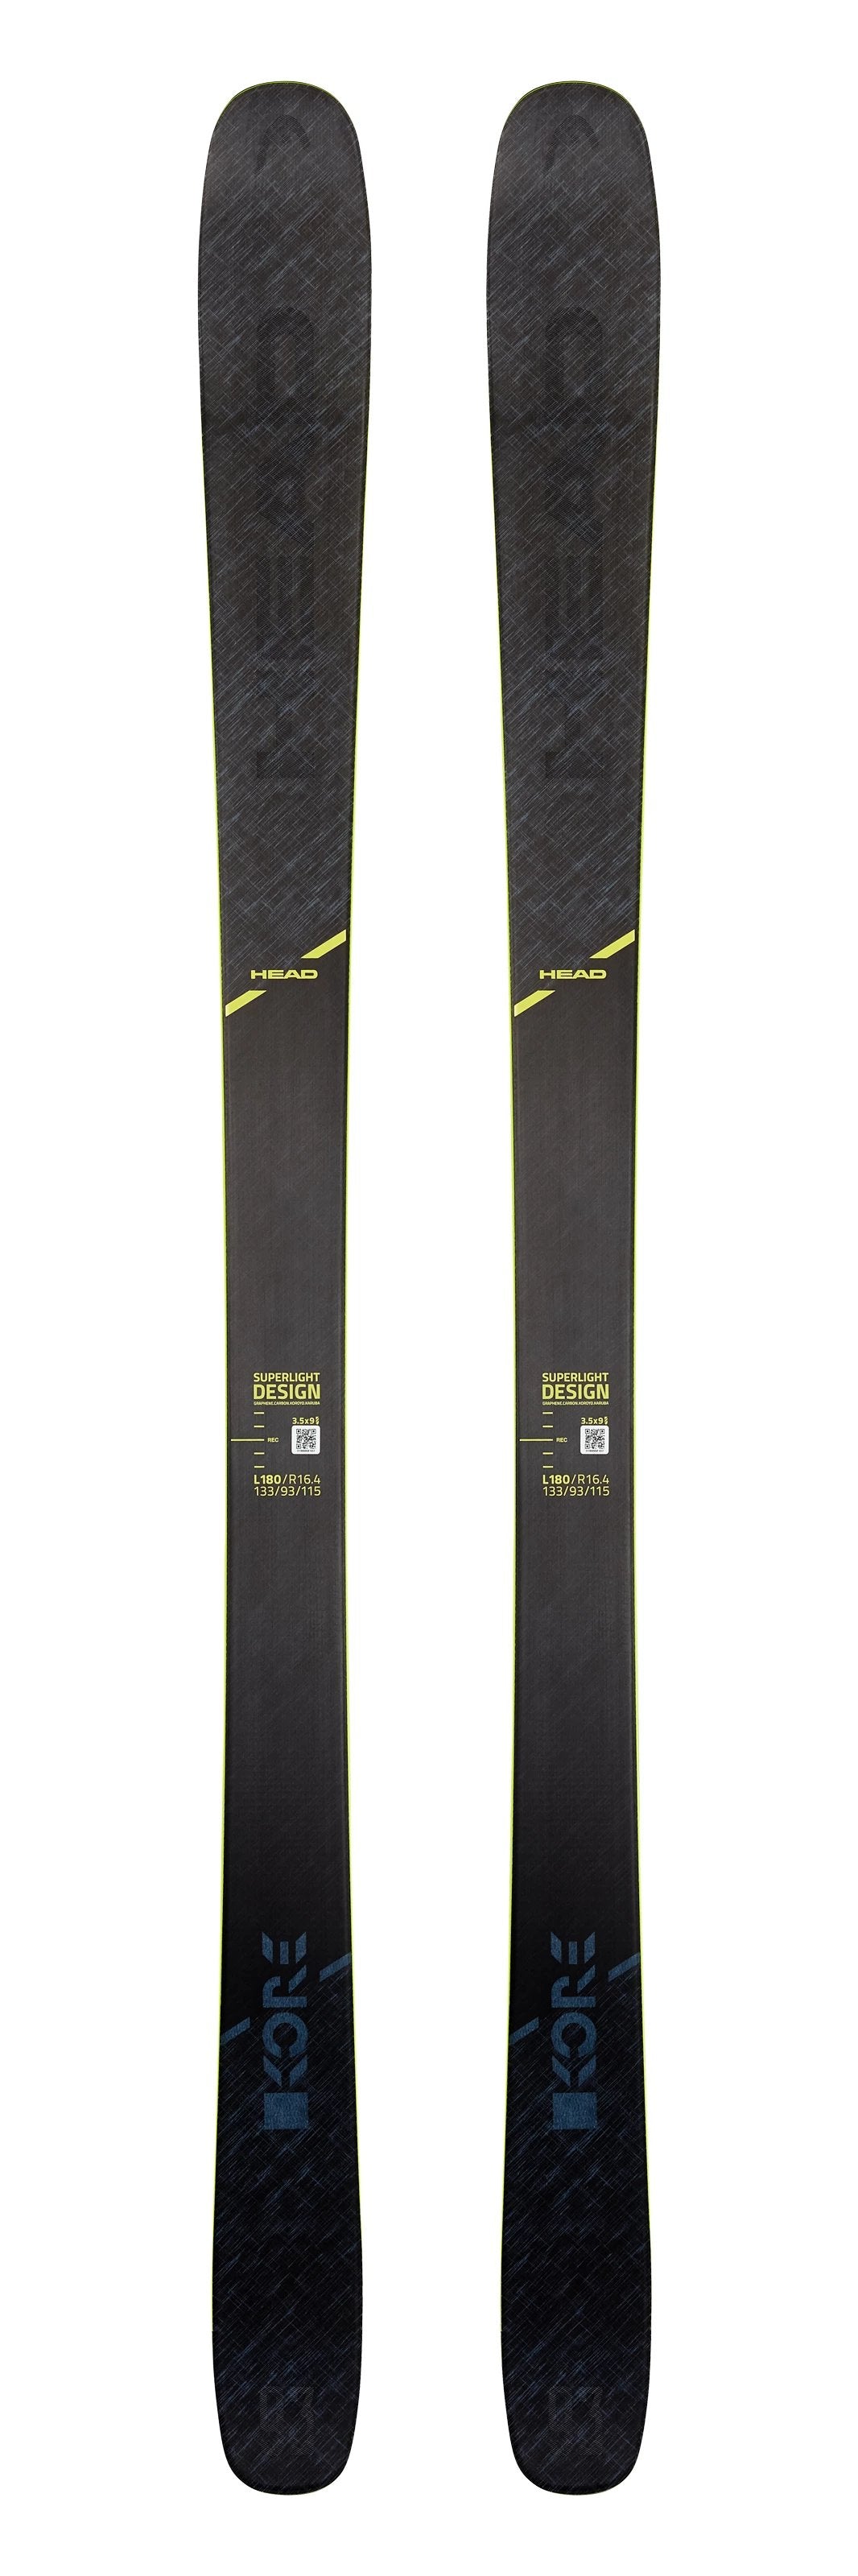 2020 Head Kore 93 snow skis - ProSkiGuy your Hometown Ski Shop on the web